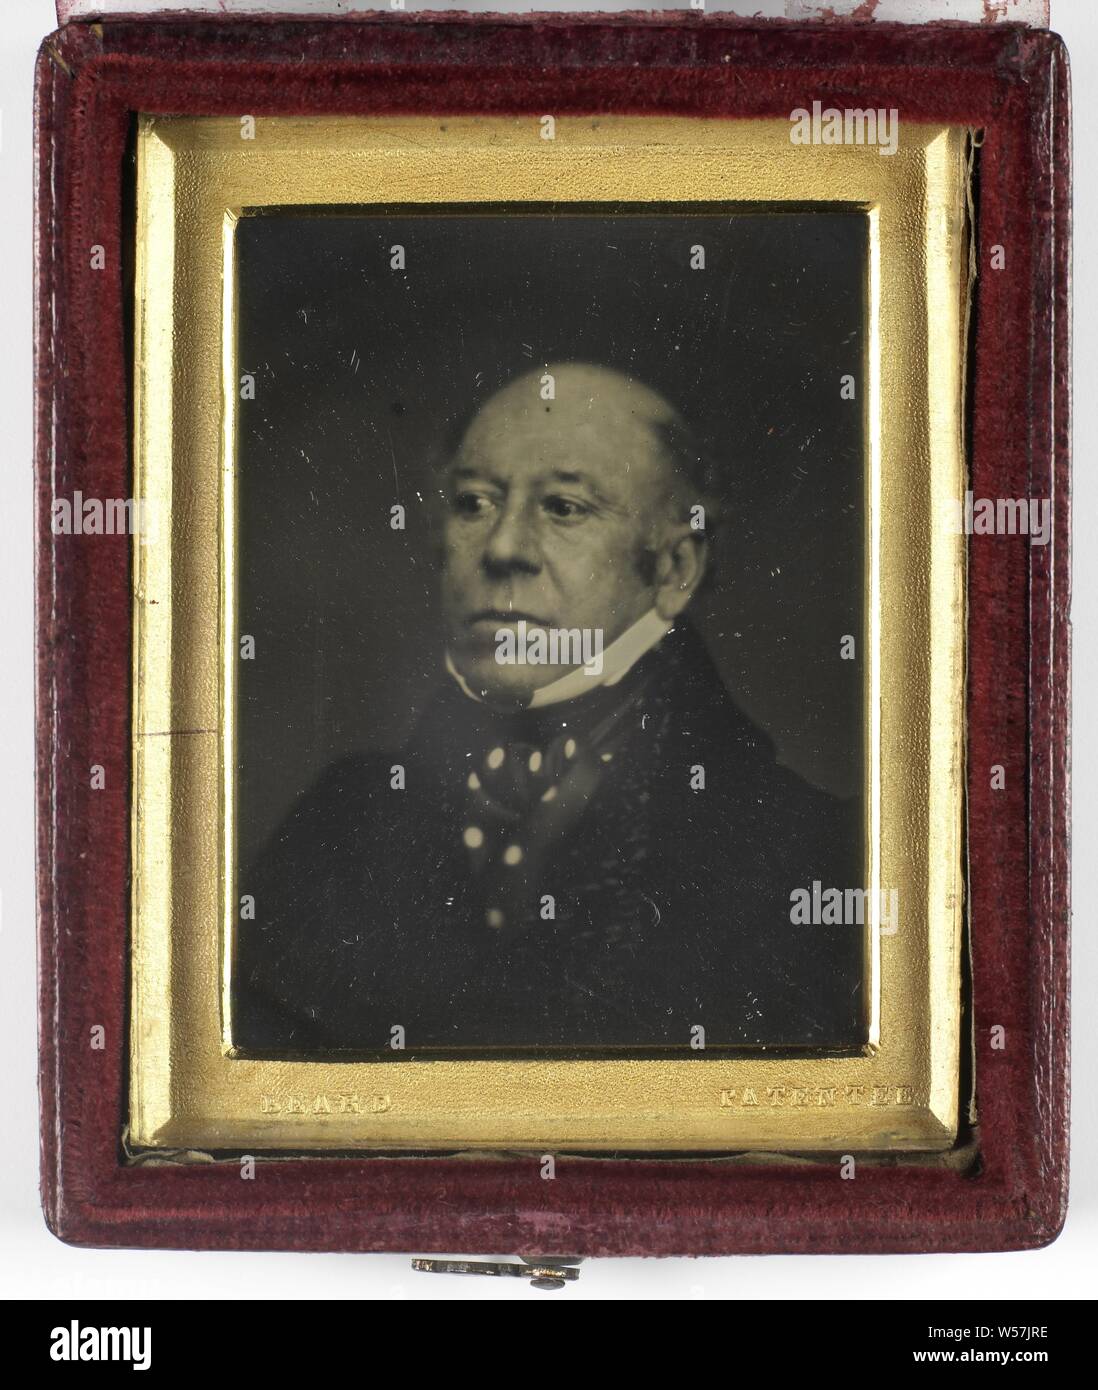 Portrait of an unknown man, historical persons, adult man, Richard Beard, 1840 - 1860, copper (metal), glass, leather, velvet (fabric weave), h 50 mm × w 39 mm h 61 mm × w 73 mm × t 15 mm Stock Photo